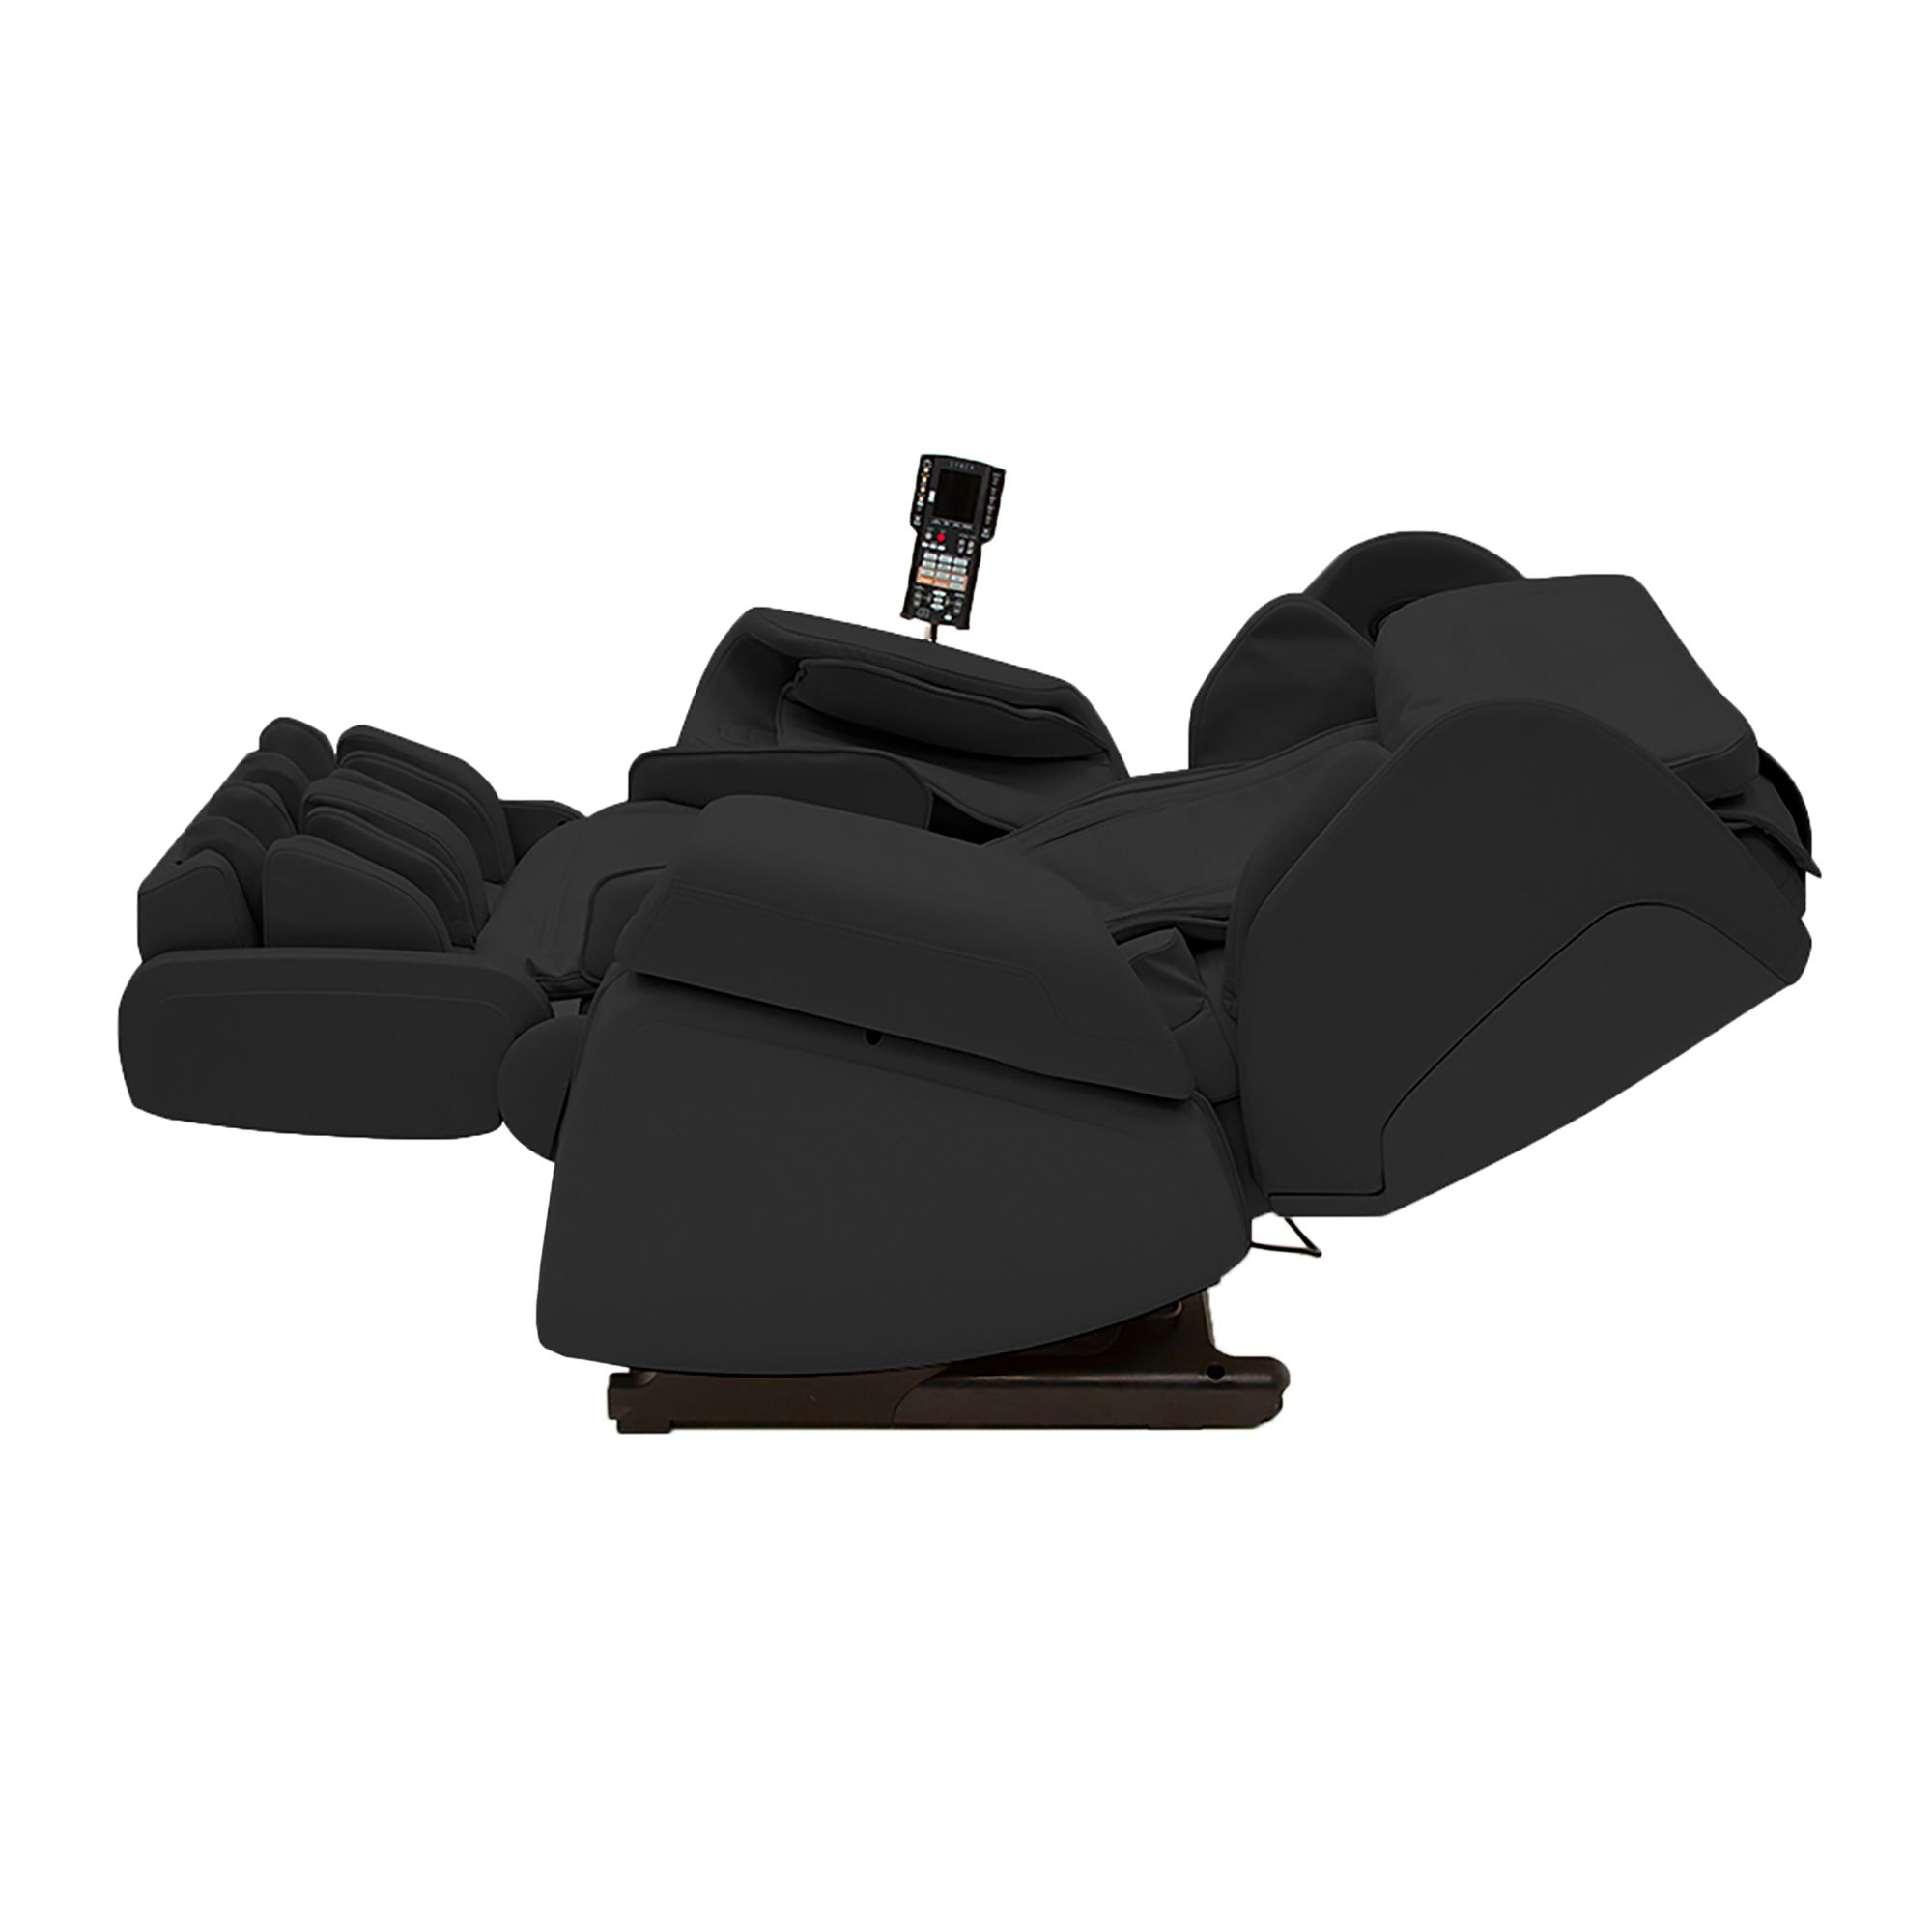 Black Kagra Massage Lounger fully reclined